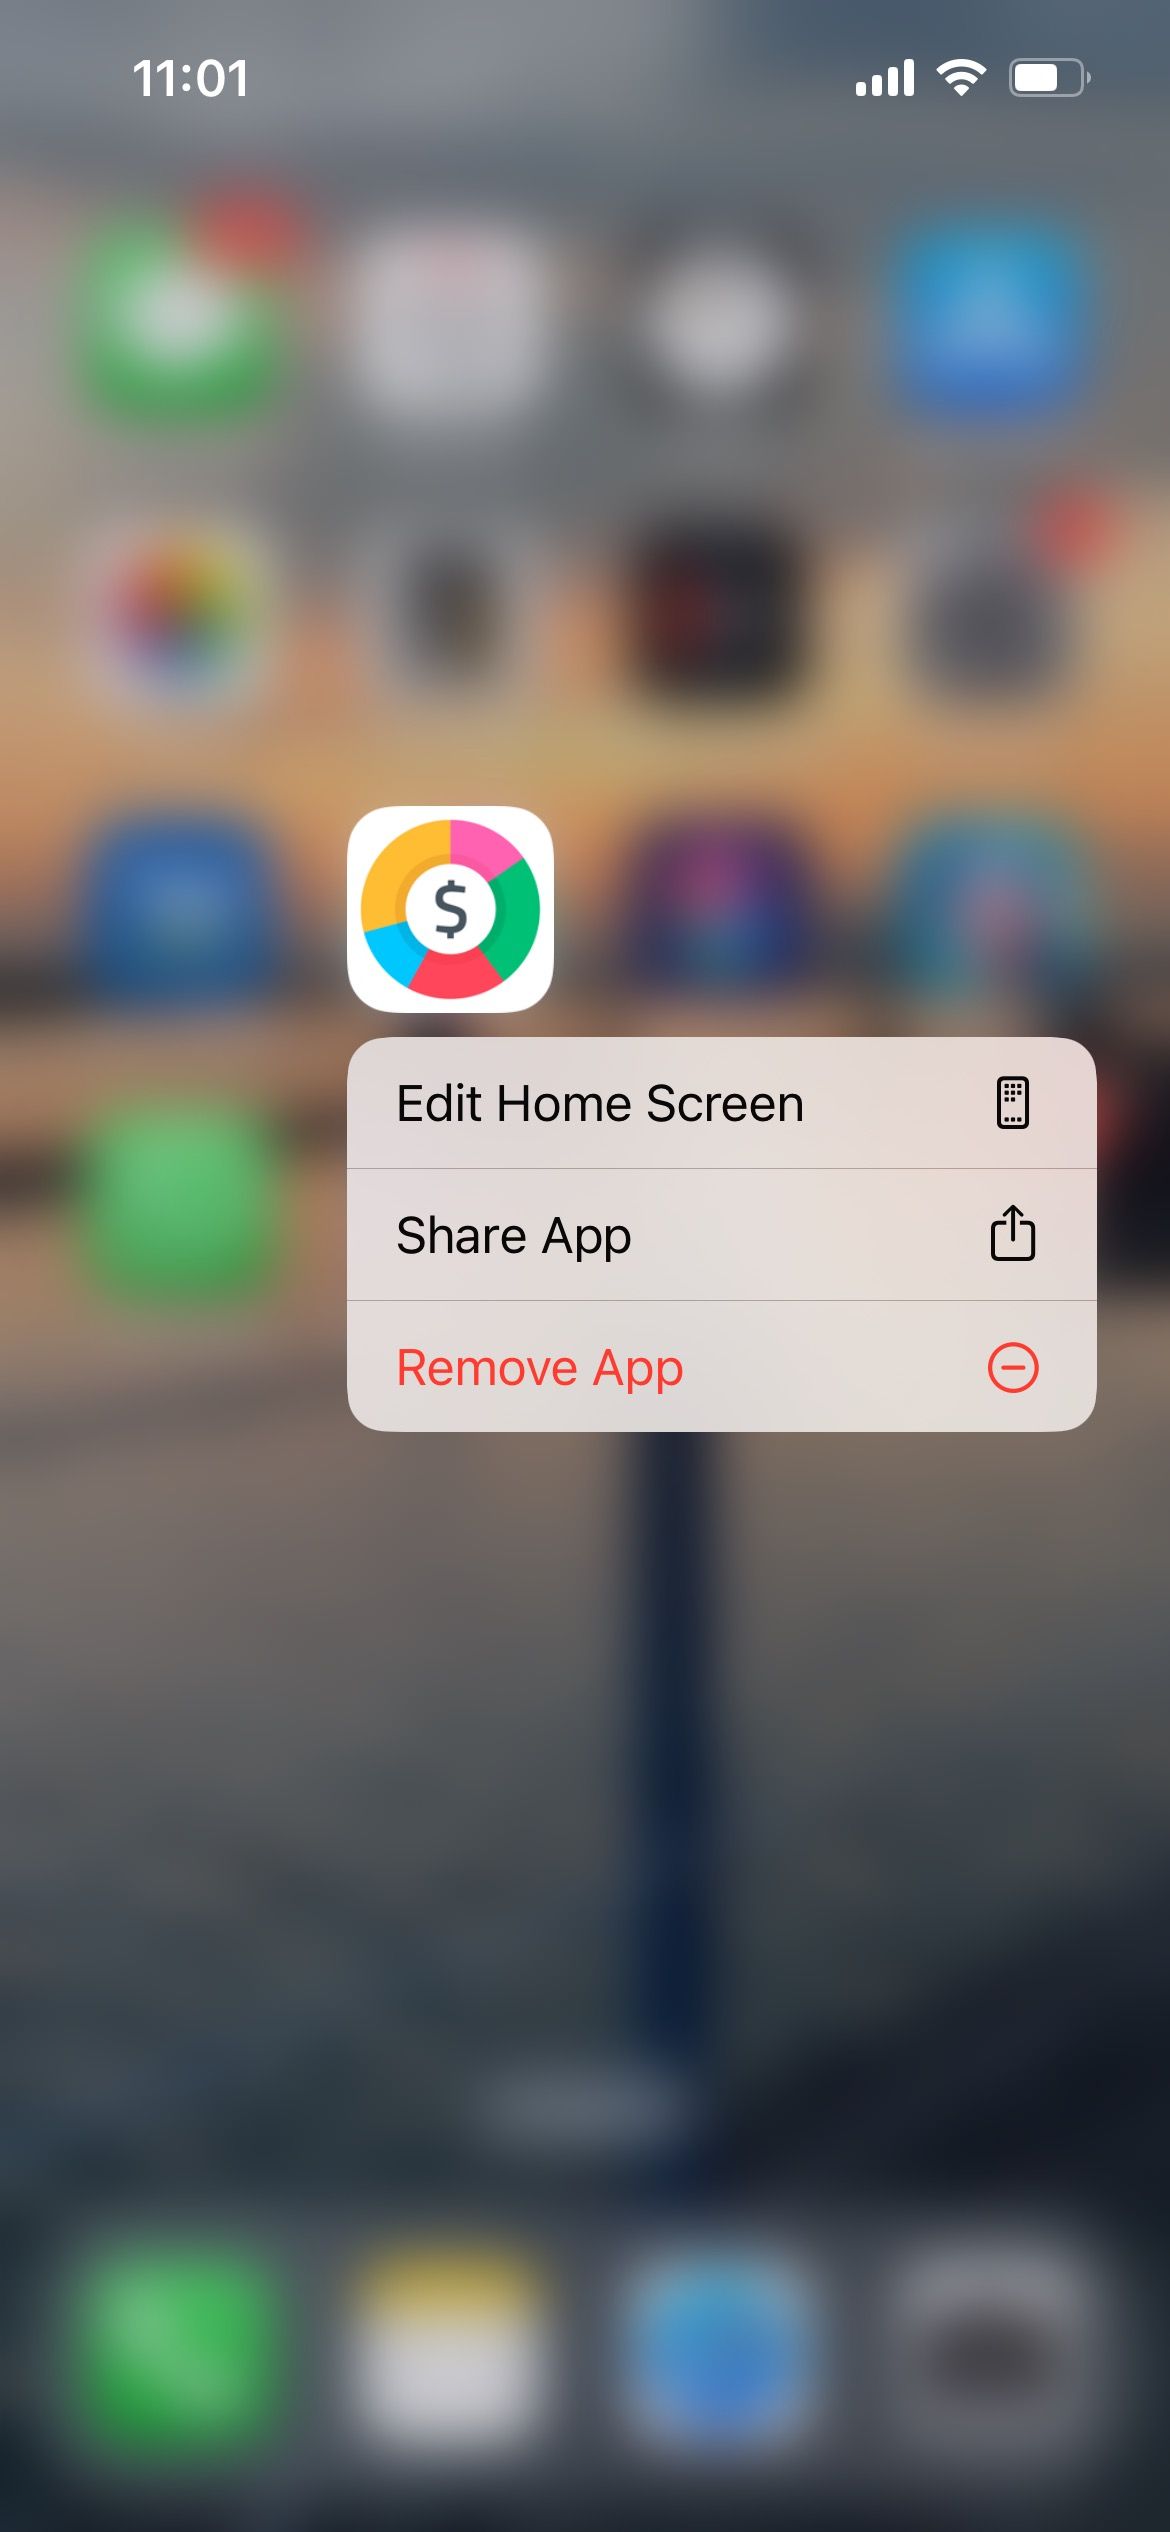 app options on iphone home screen